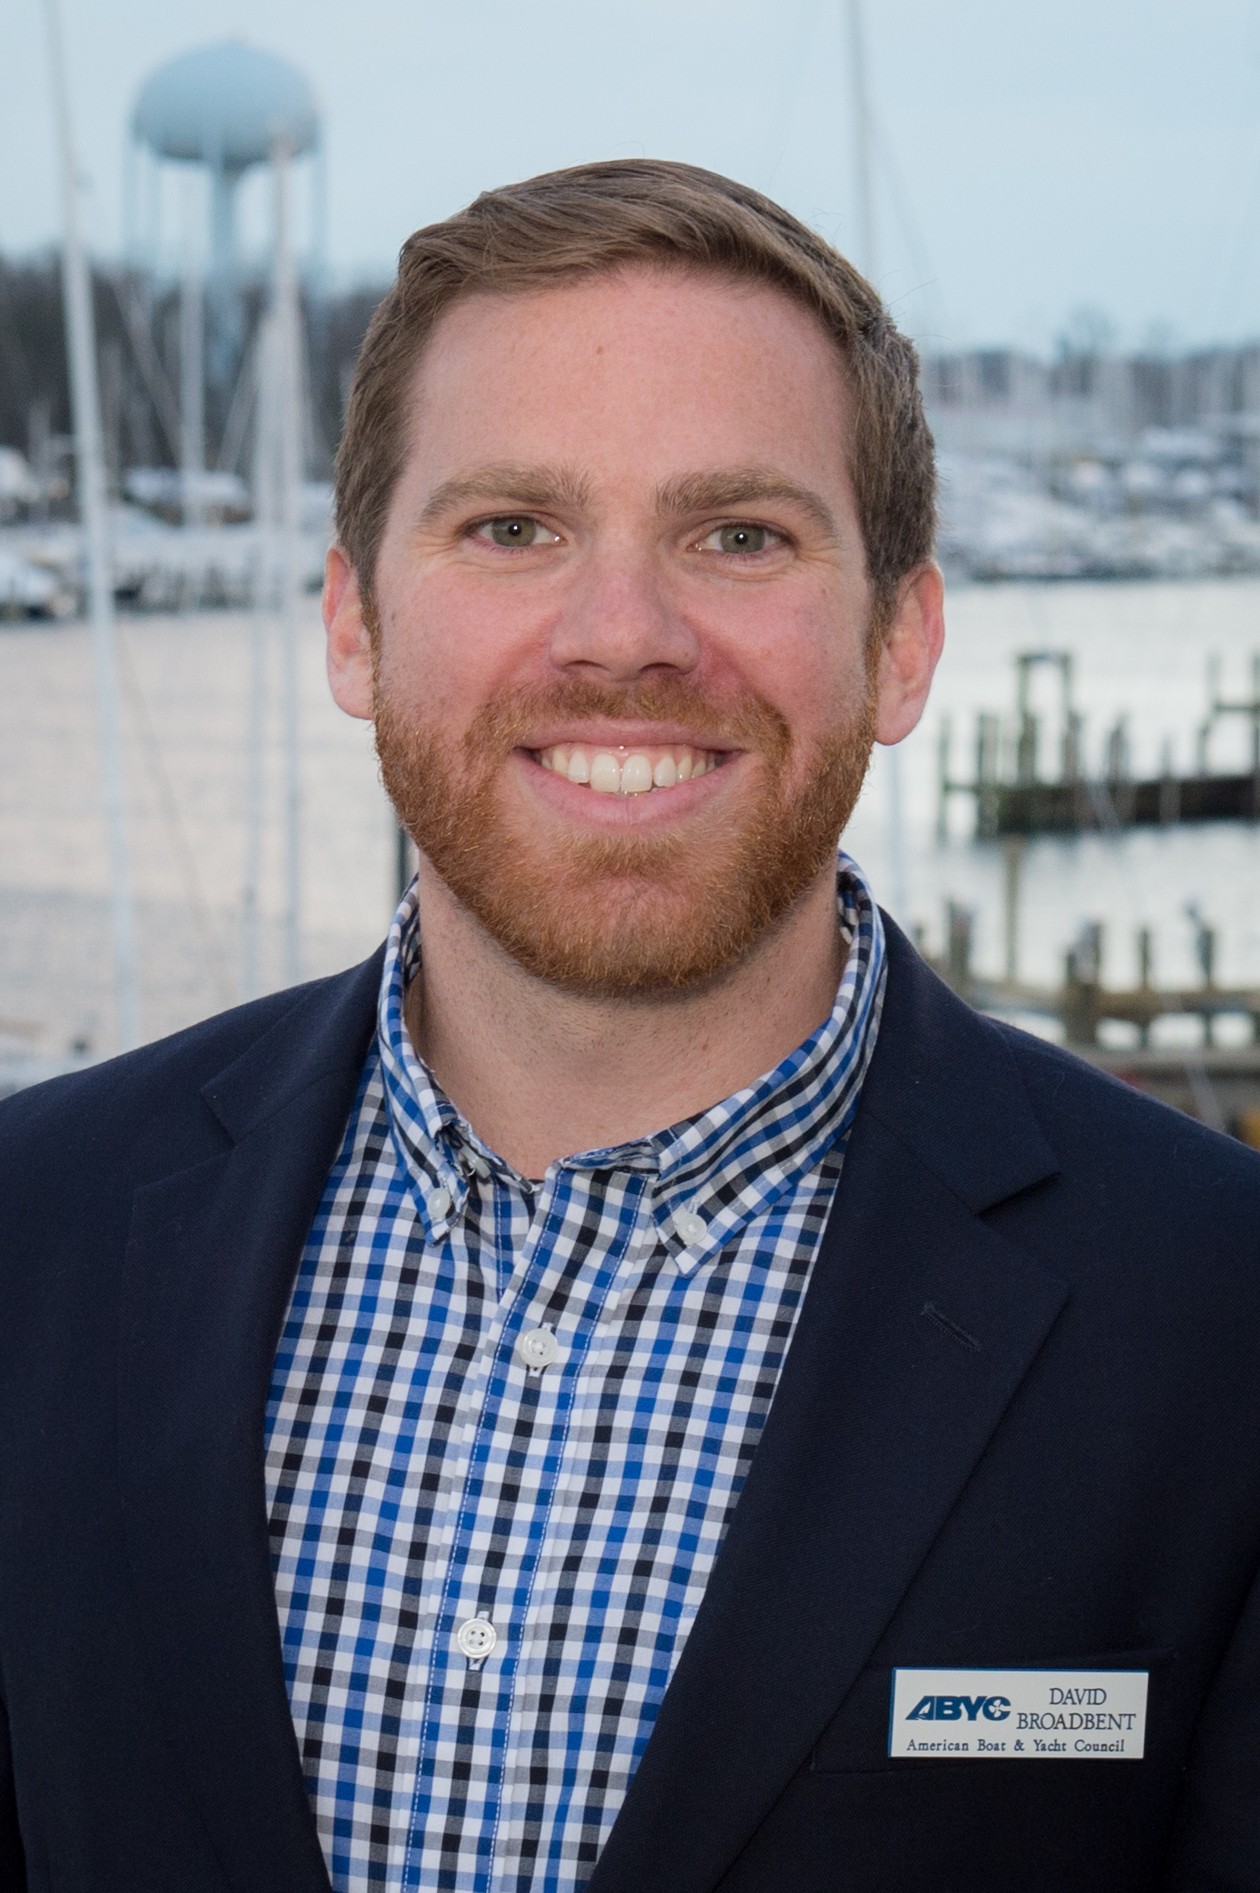 American Boat & Yacht Council management changes